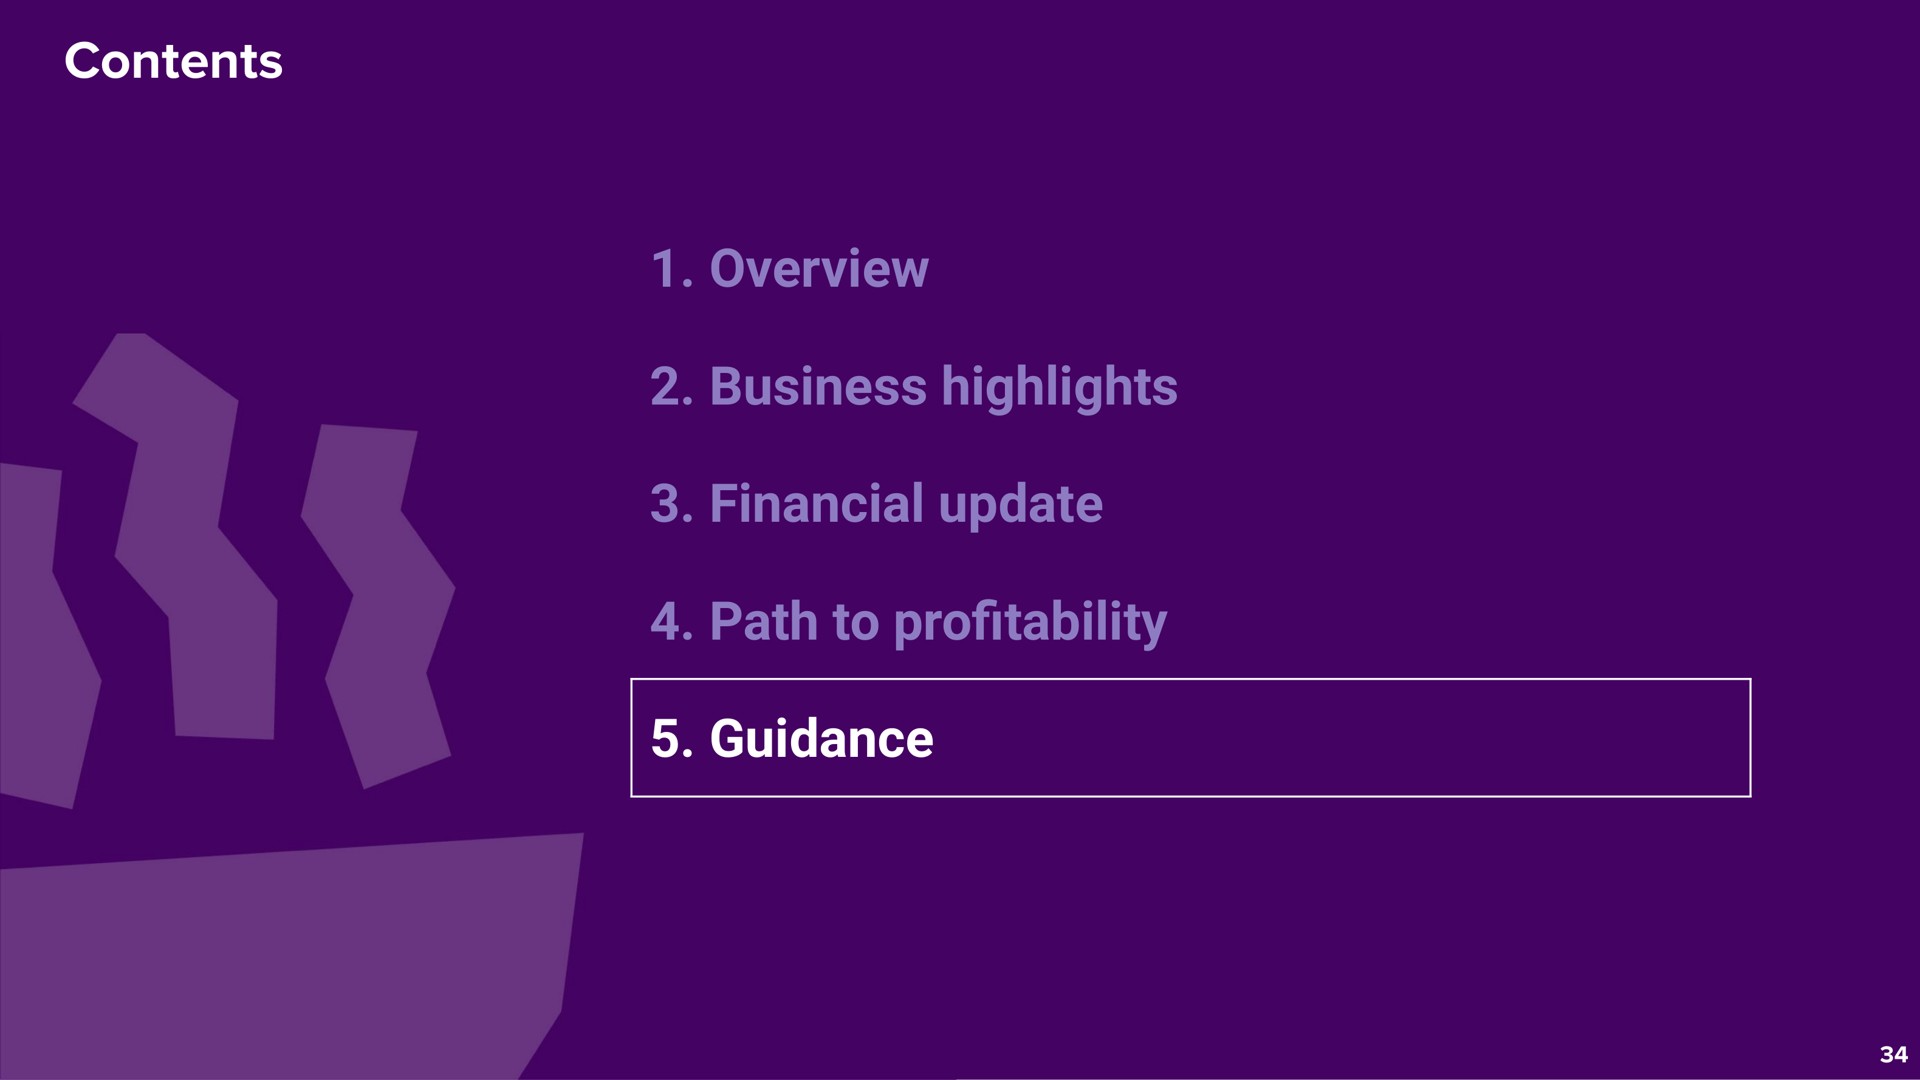 contents overview business highlights financial update path to pro guidance profitability | Deliveroo